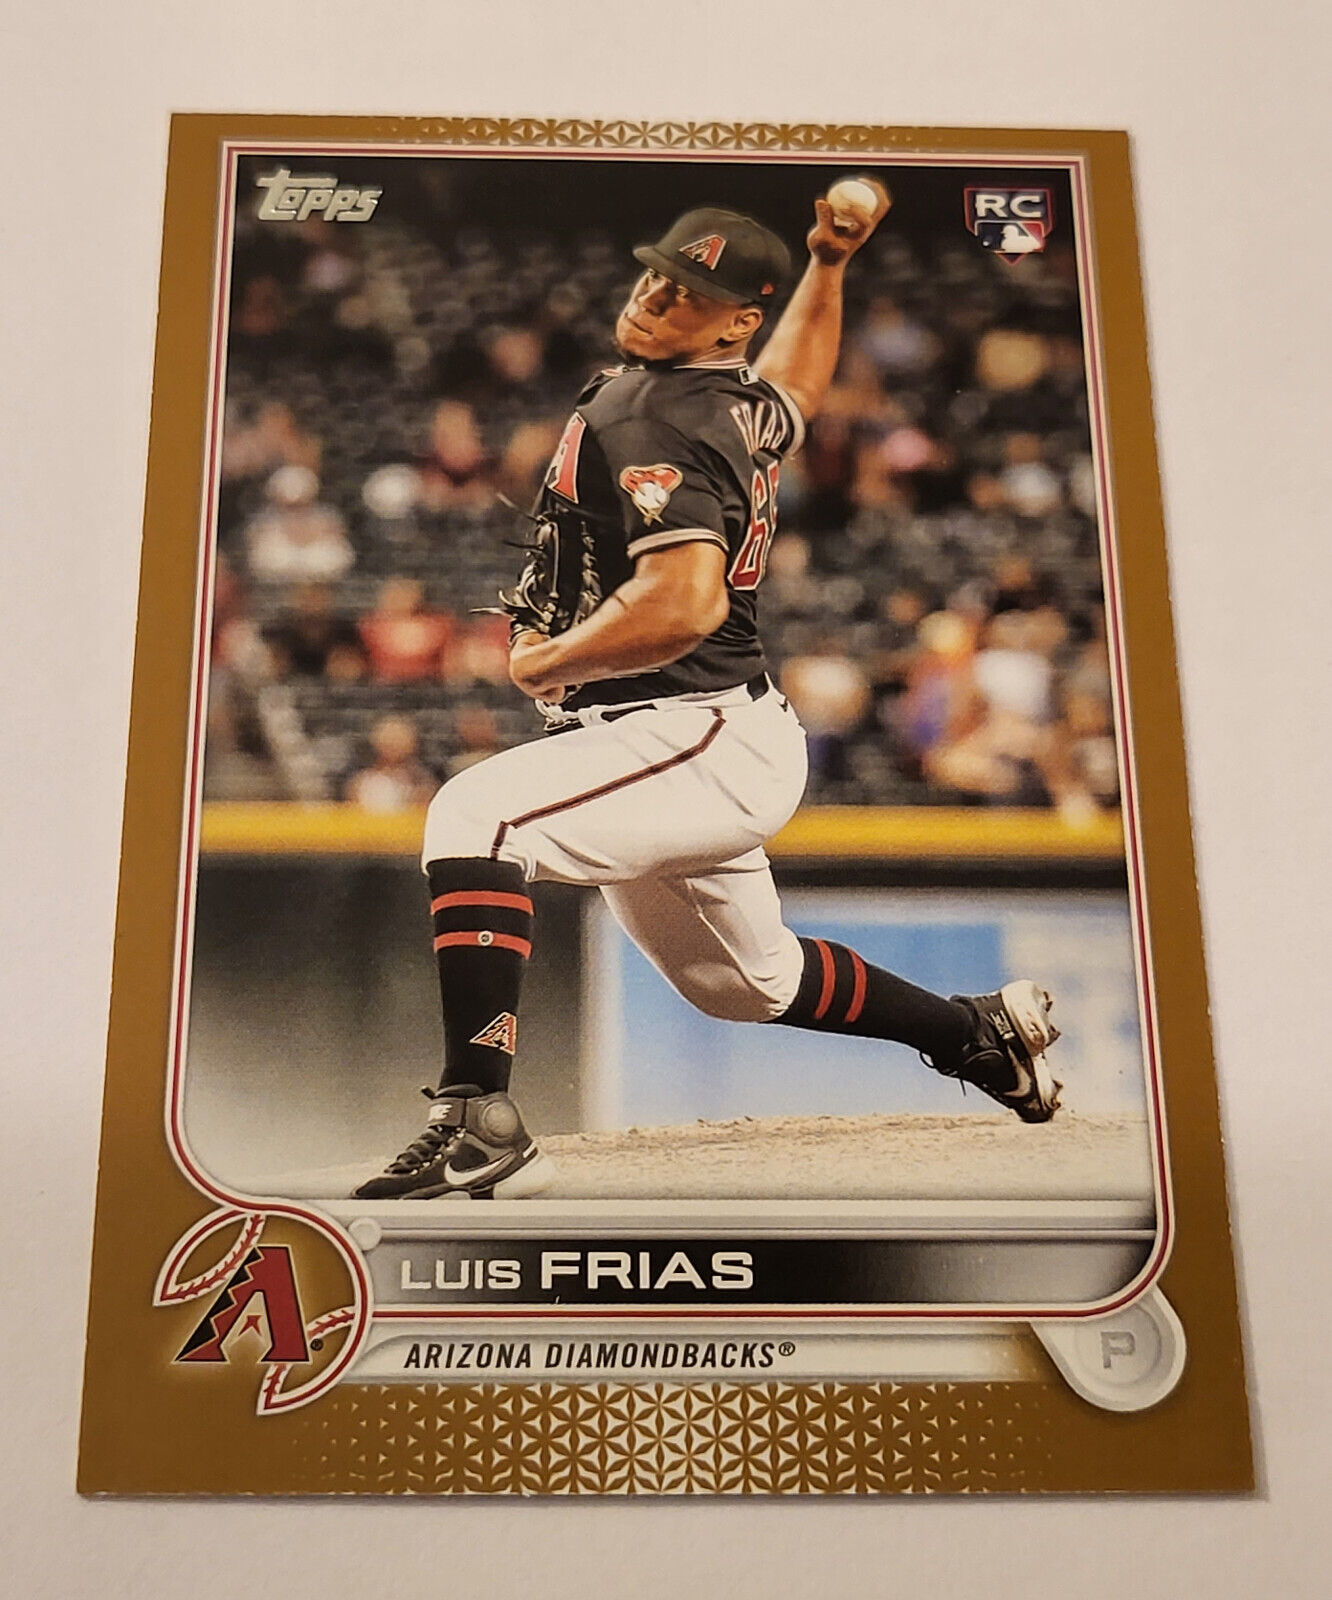 2022 TOPPS SERIES 2 GOLD BORDER ROOKIE CARD LUIS FRIAS #0220/2022. rookie card picture